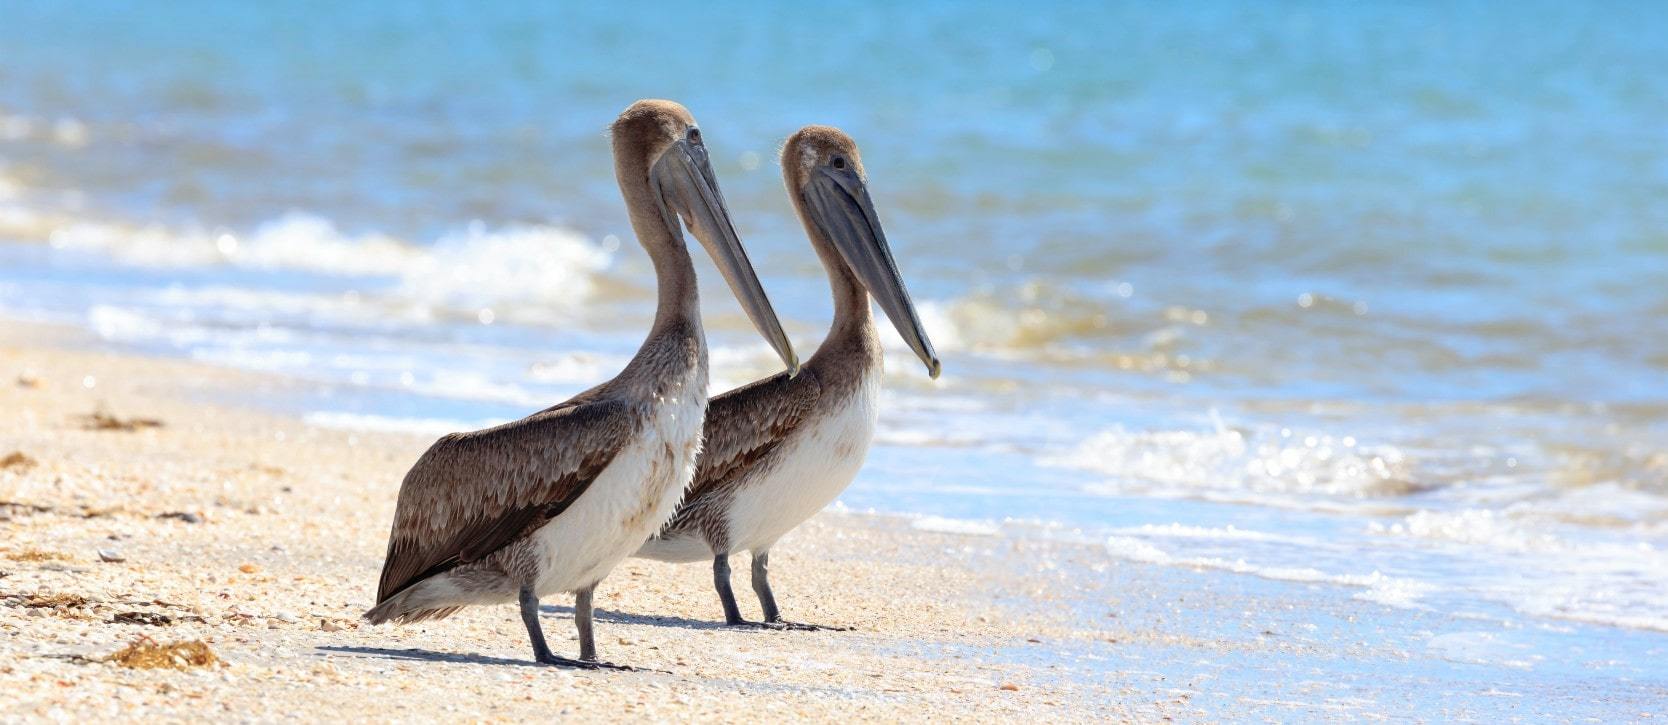 Two pelicans standing on a white sand beach next to the ocean at Pelican Bay, Florida